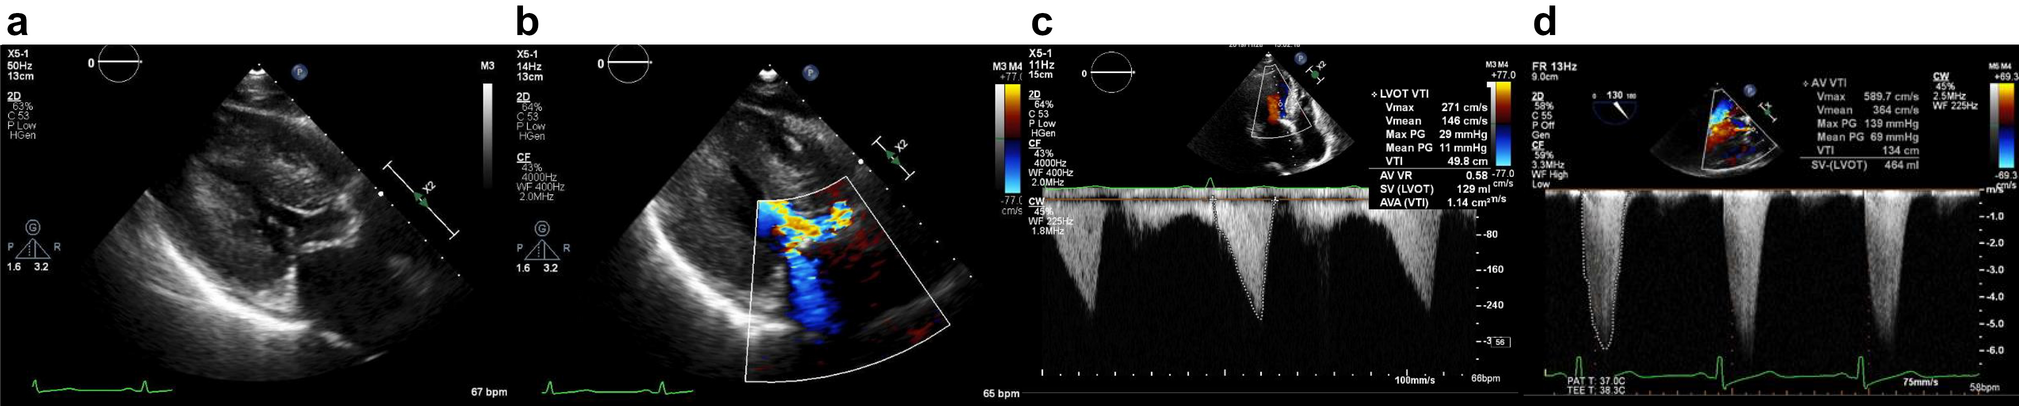 A case of left ventricular outflow tract obstruction detected after transcatheter aortic valve implantation